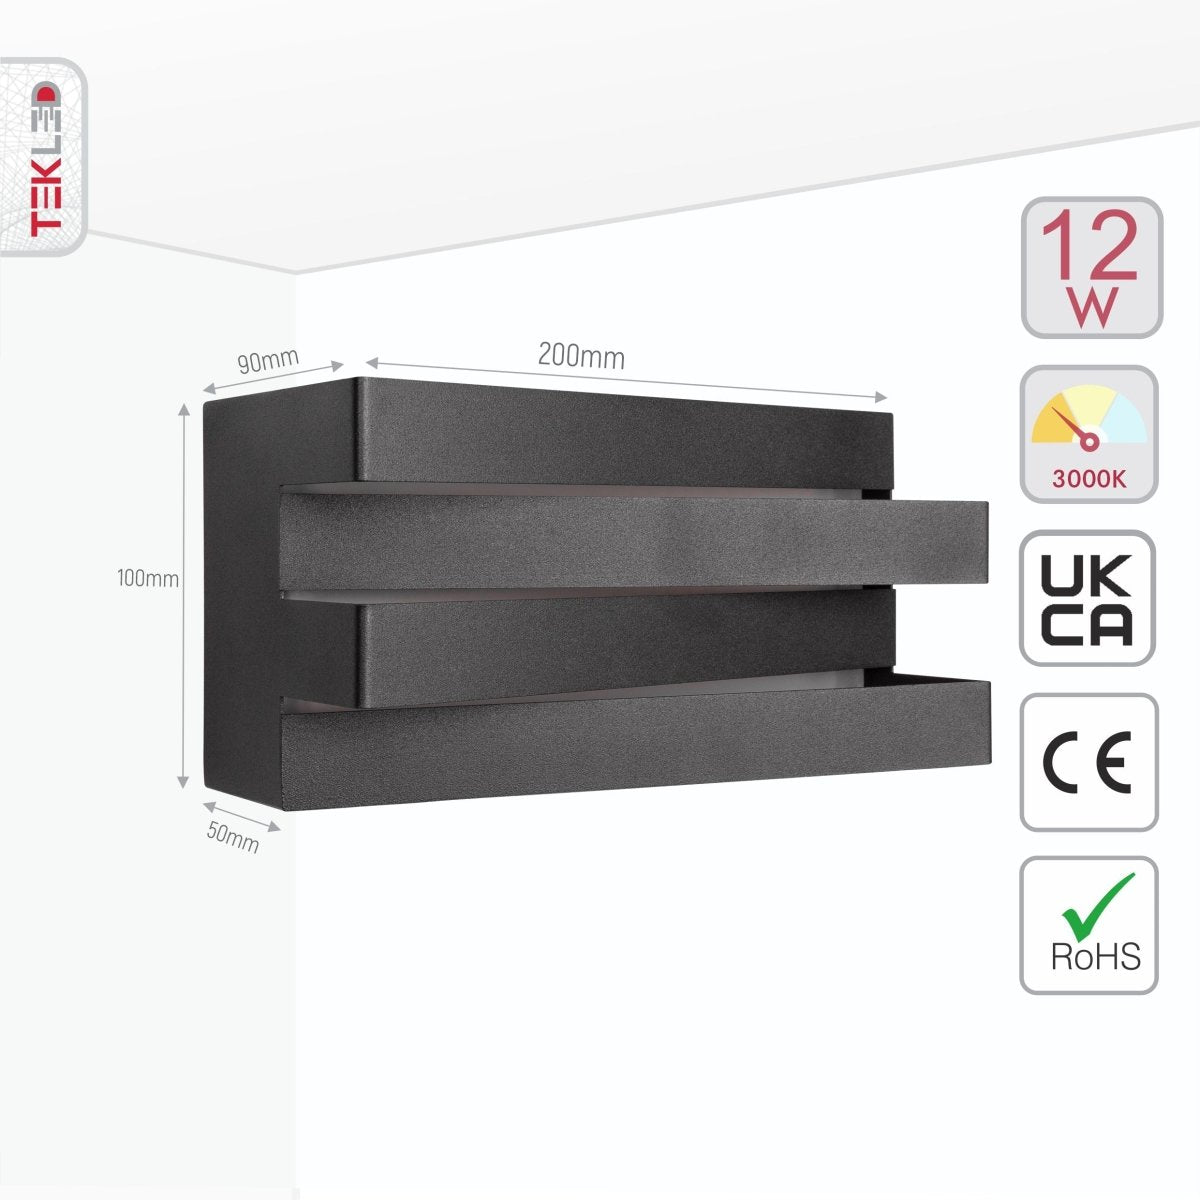 Size and specs of LED Black Metal Wall Light 12W Warm White 3000K | TEKLED 151-19534